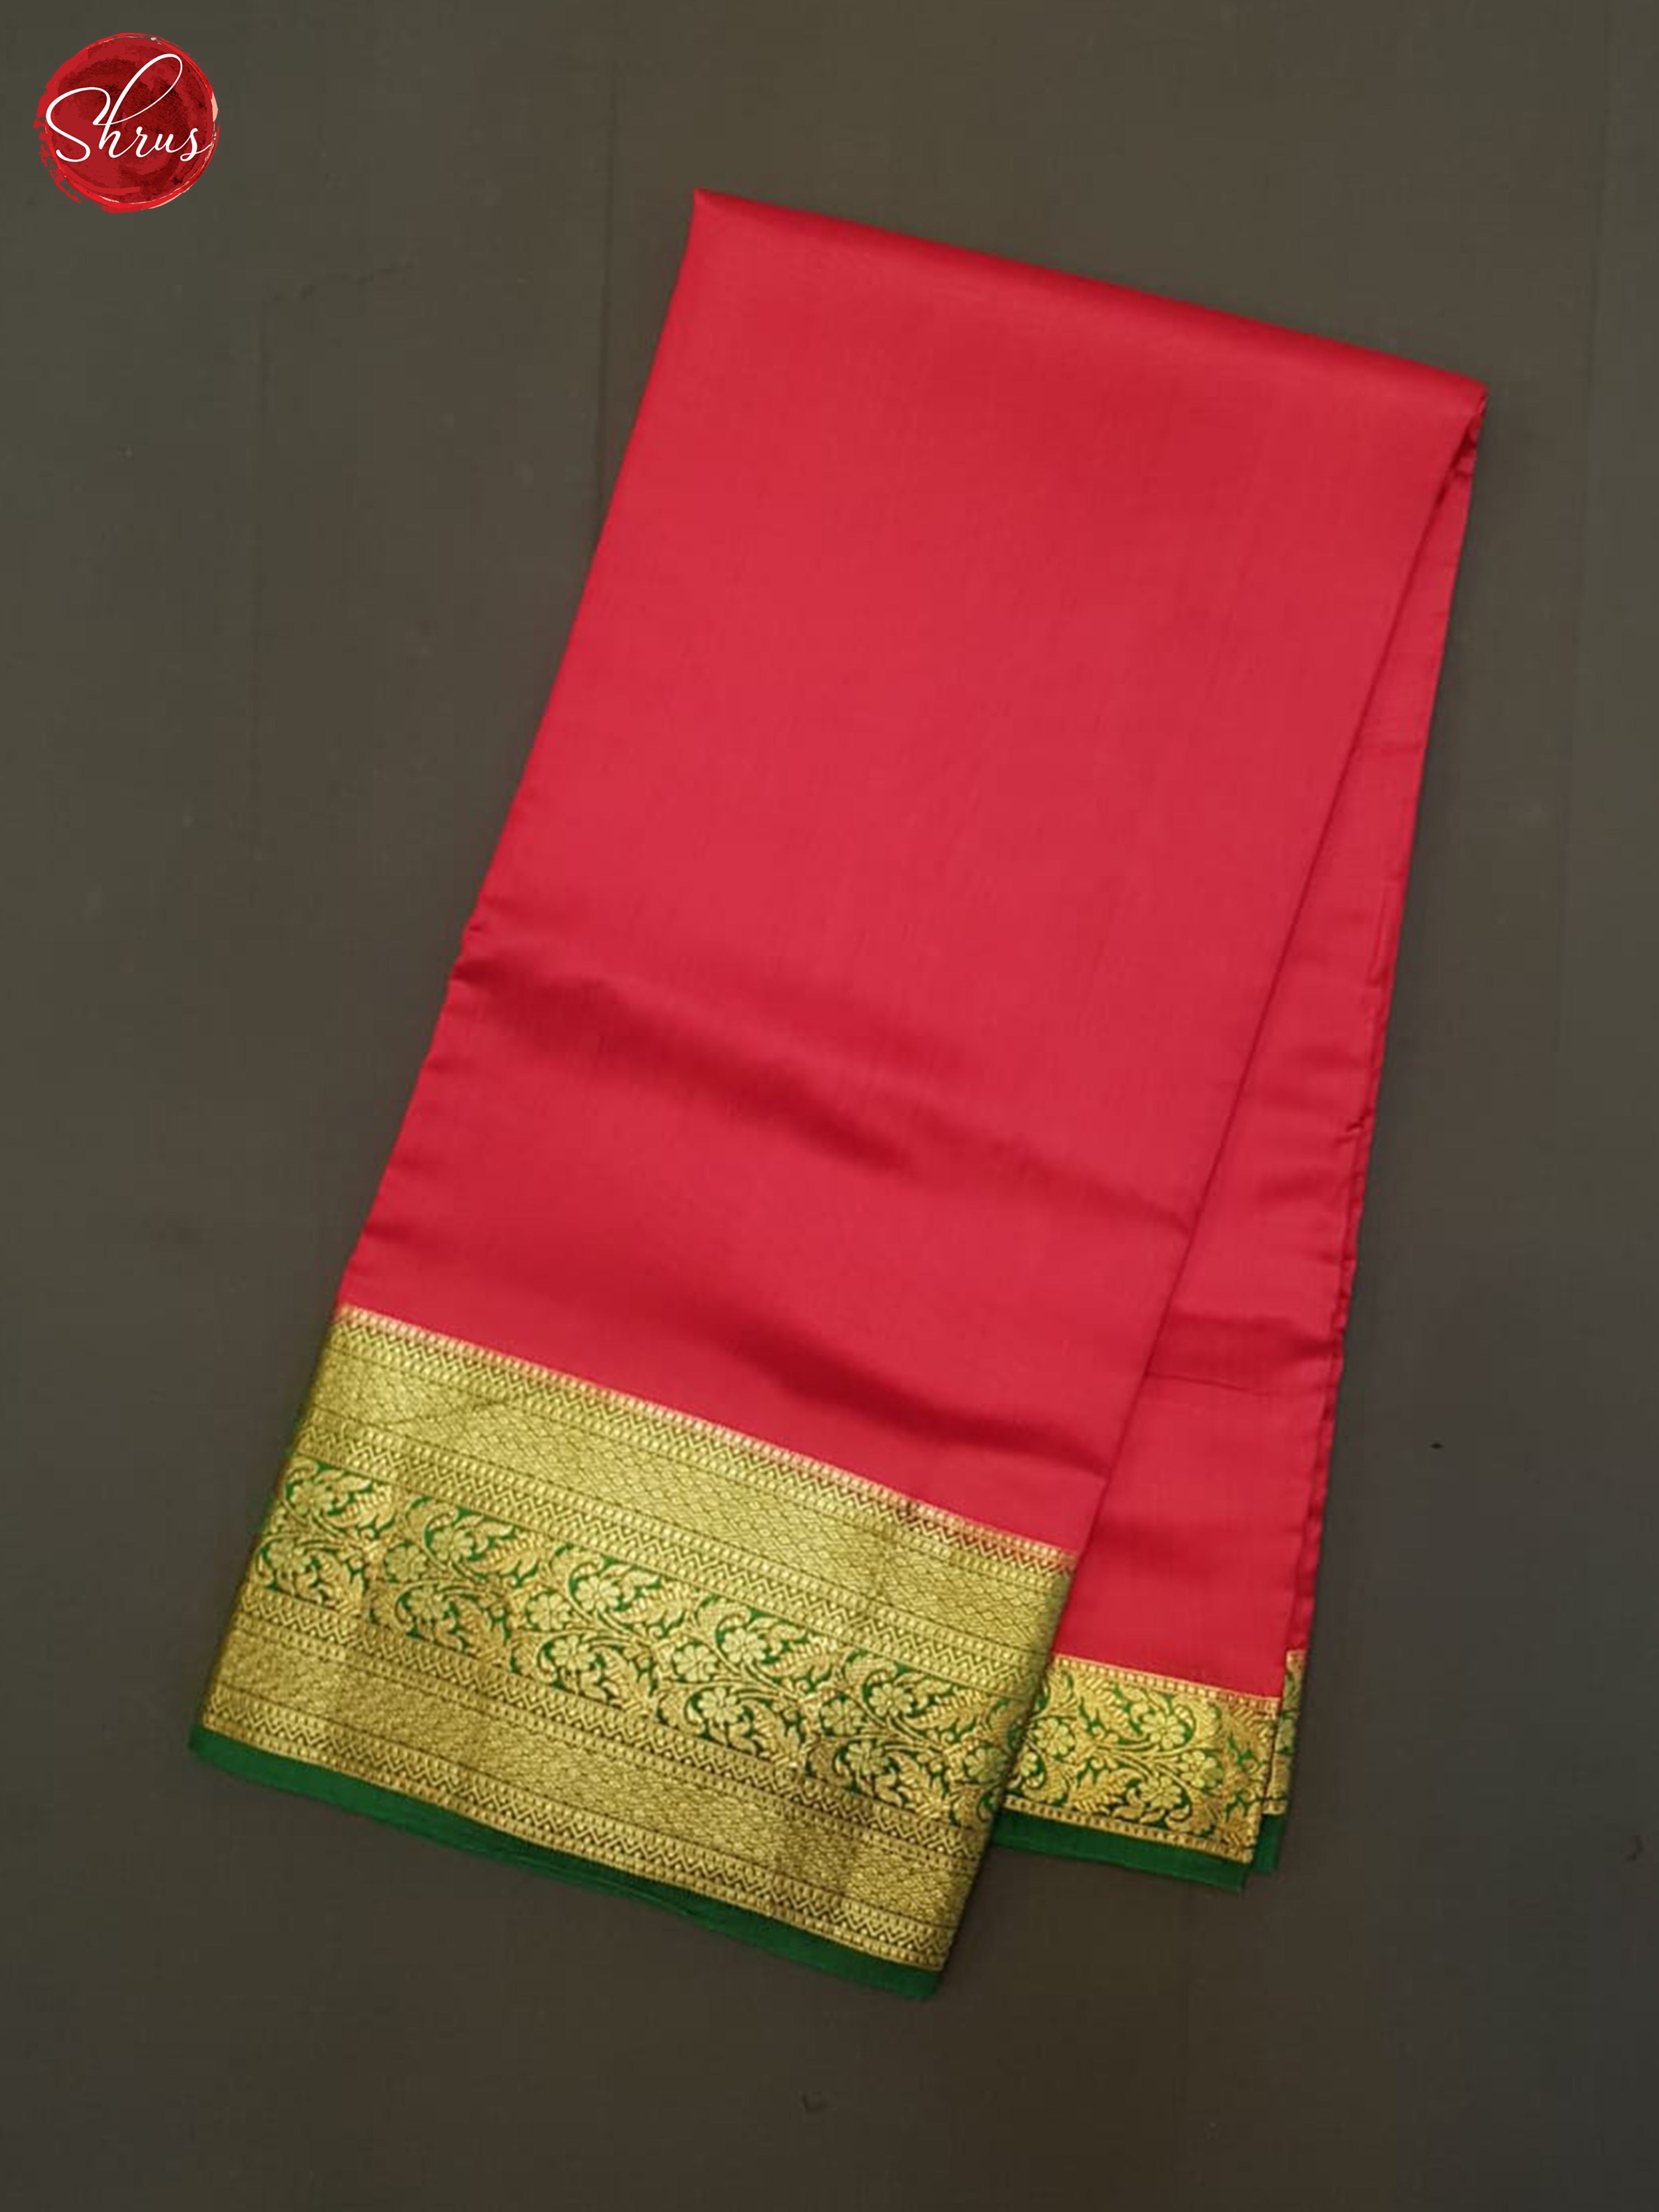 Red and Green - Tussar Silk Saree - Shop on ShrusEternity.com